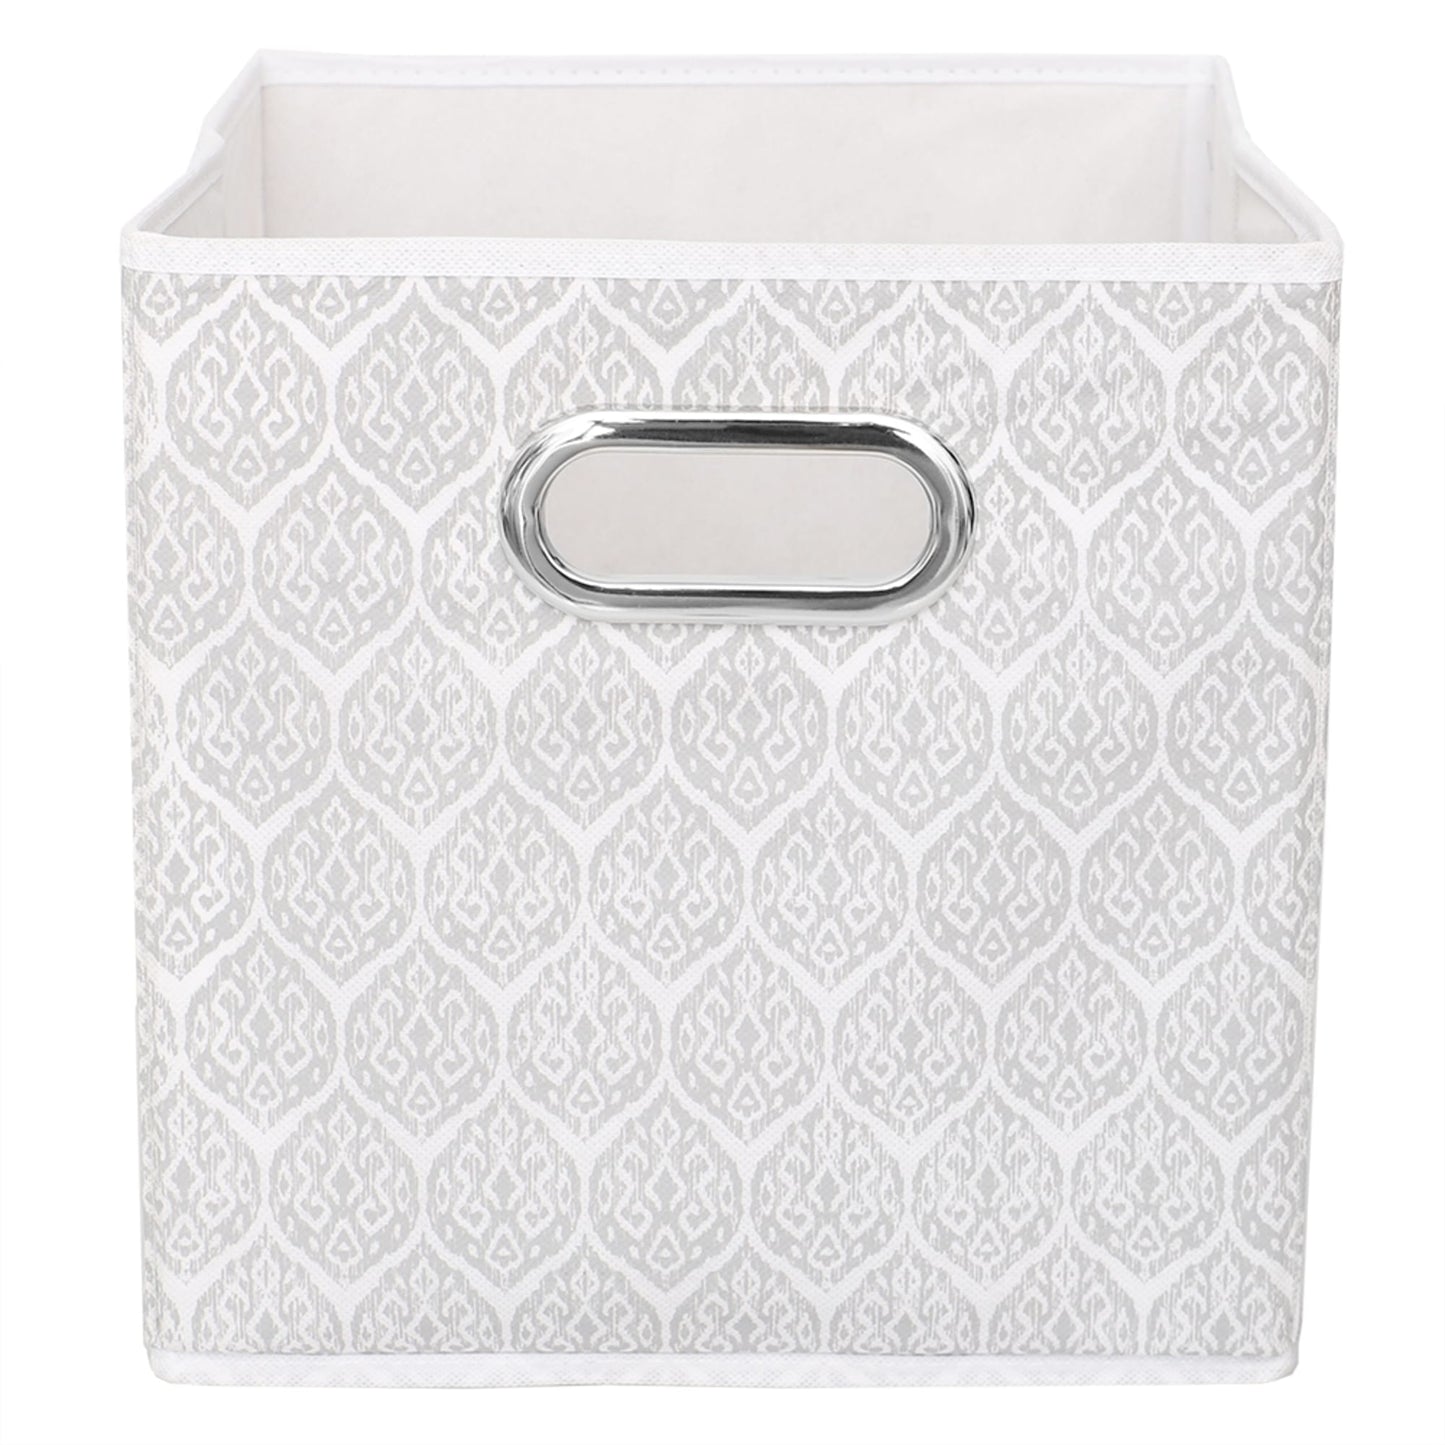 Ikat Collapsible Non-Woven Storage Bin with Grommet Handle, Grey